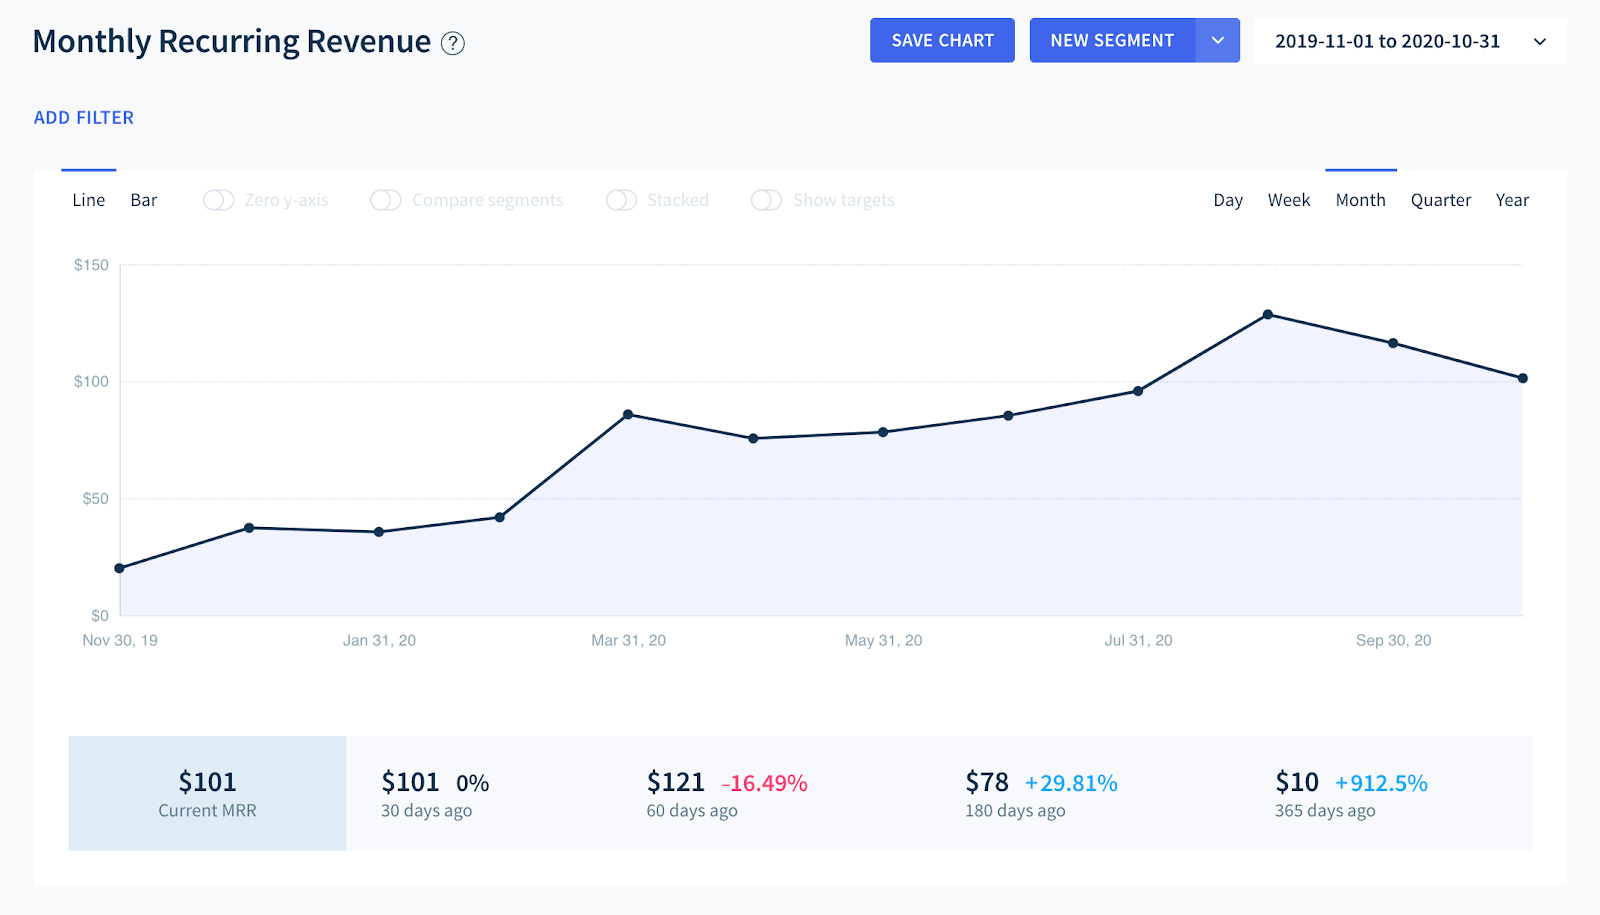 ChartMogul's Subscription Data Platform calculates SaaS growth rates out of the box